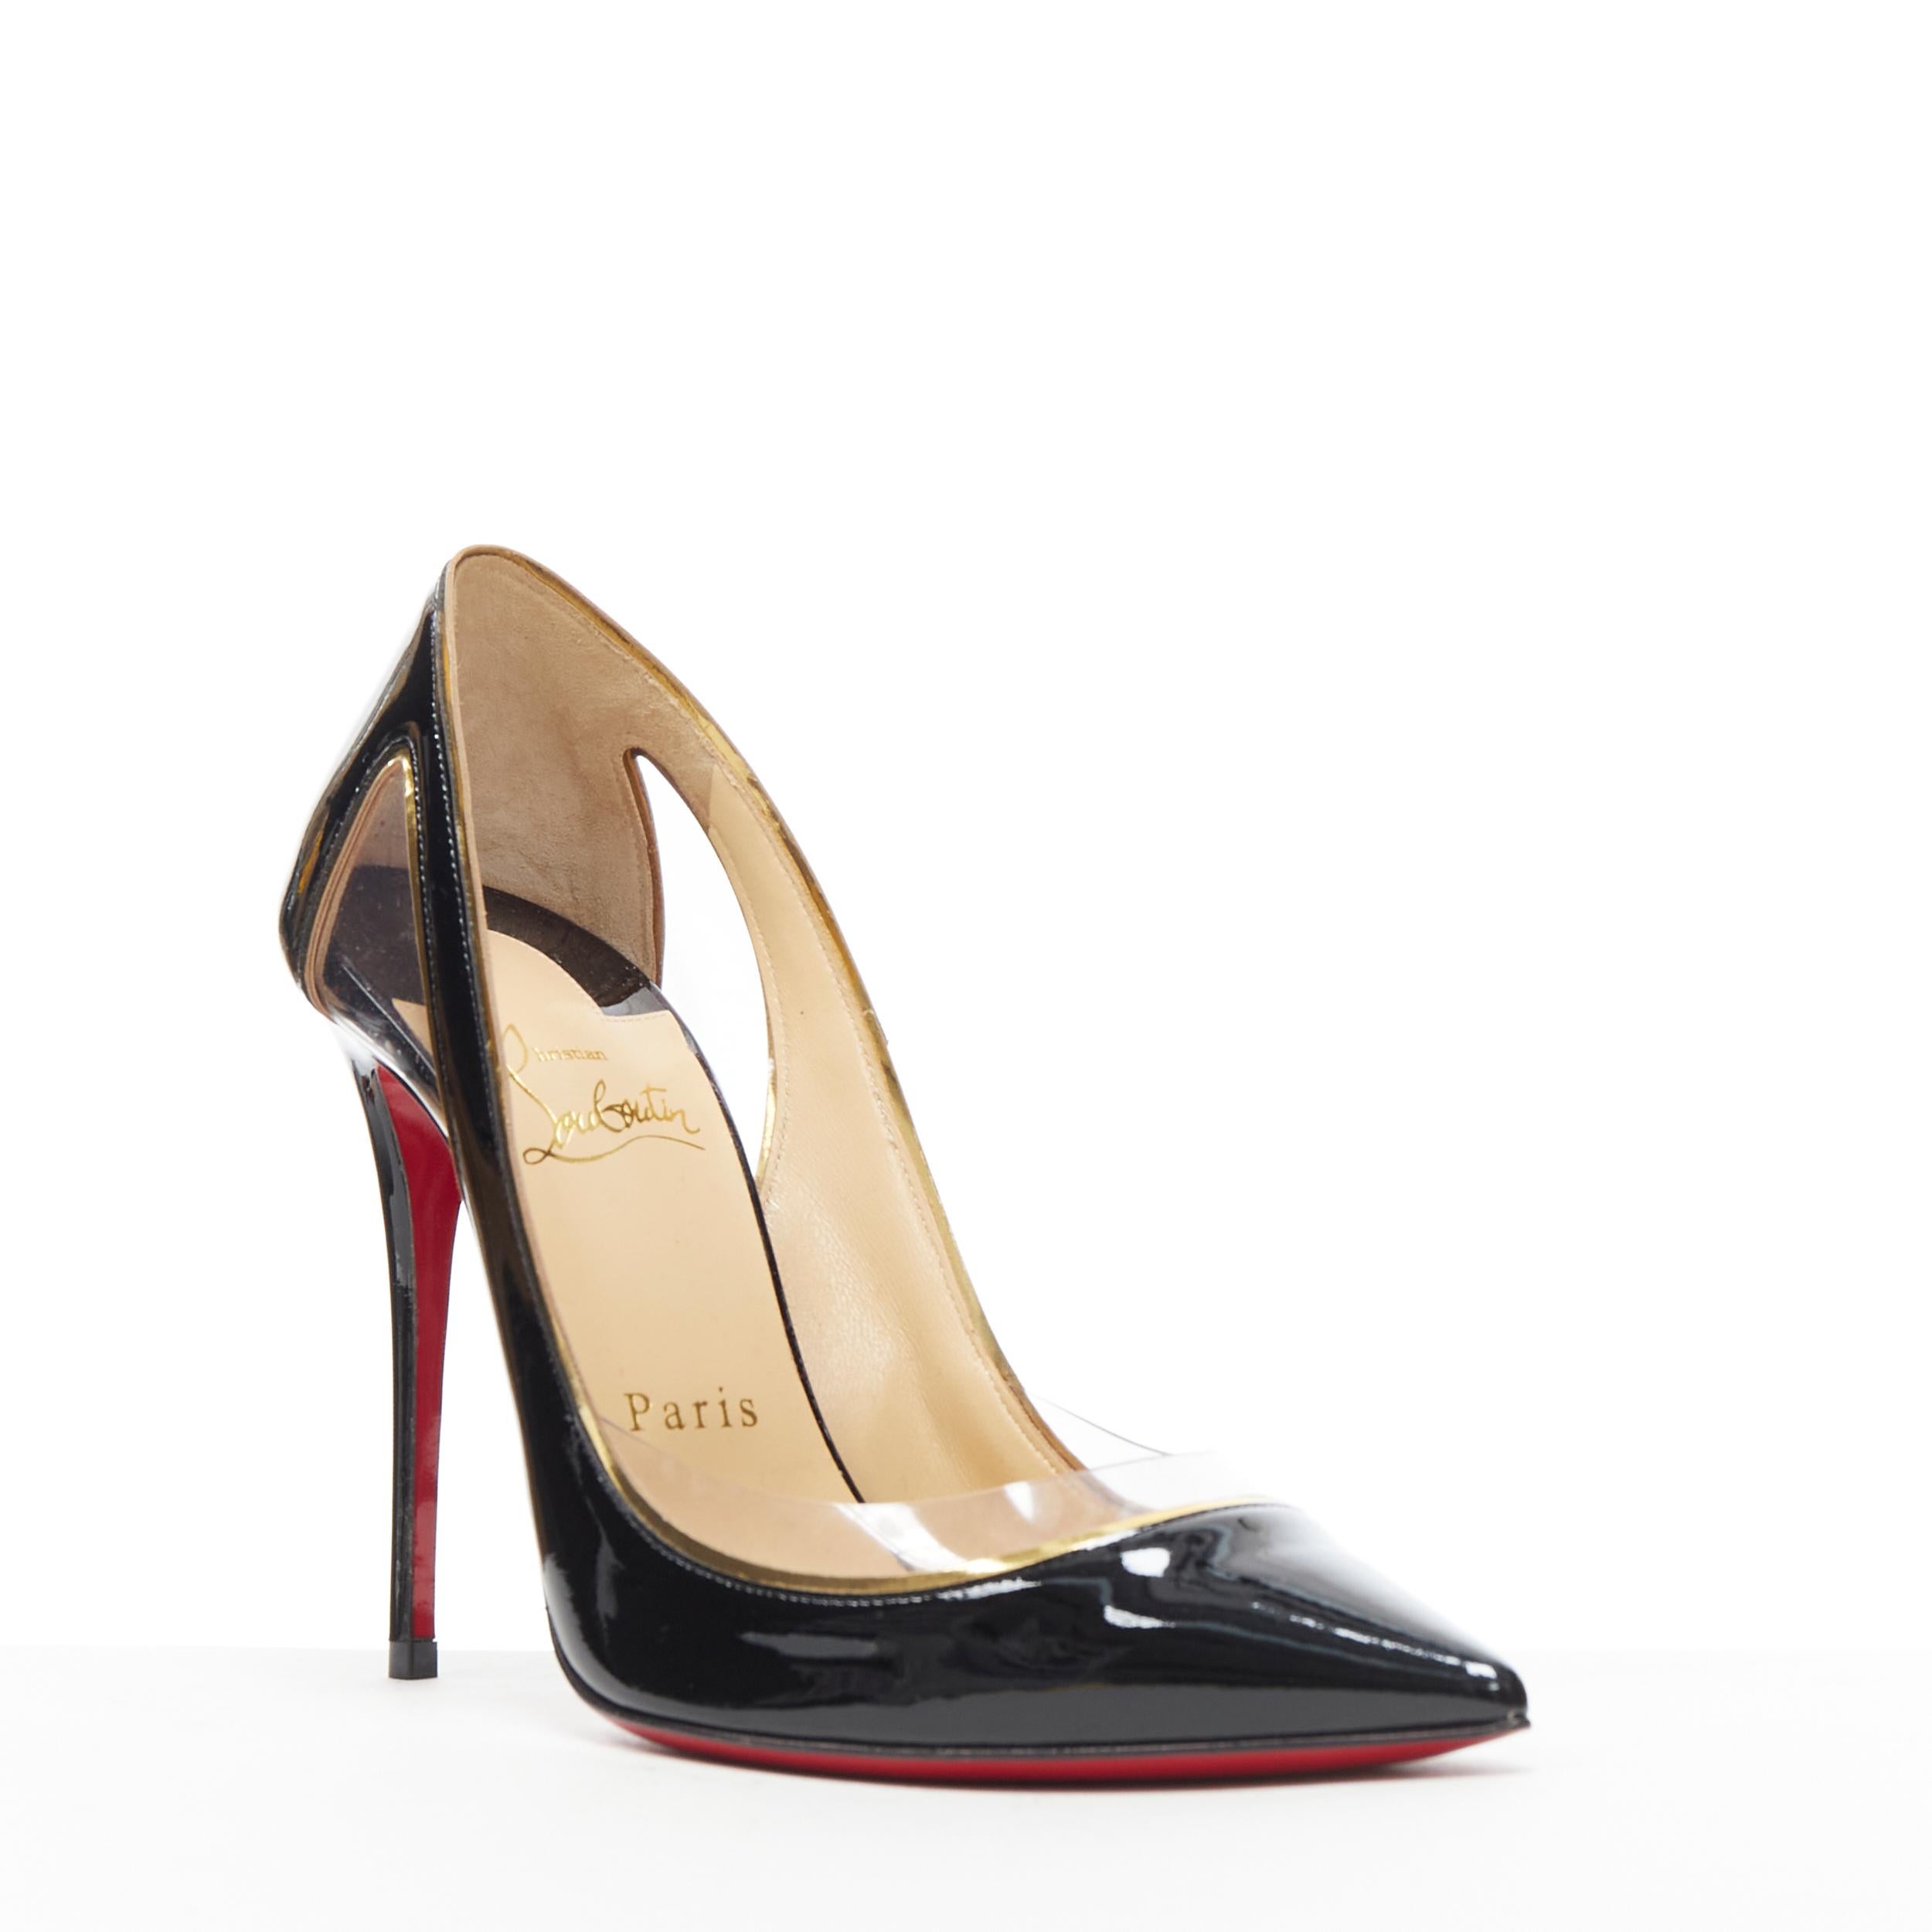 new CHRISTIAN LOUBOUTIN Cosmo 554 black patent gold PVC trimmed Pigalle EU37.5 
Reference: TGAS/B00131 
Brand: Christian Louboutin 
Designer: Christian Louboutin 
Model: Cosmo 554 
Material: Patent leather 
Color: Black 
Pattern: Solid 
Closure: Zip